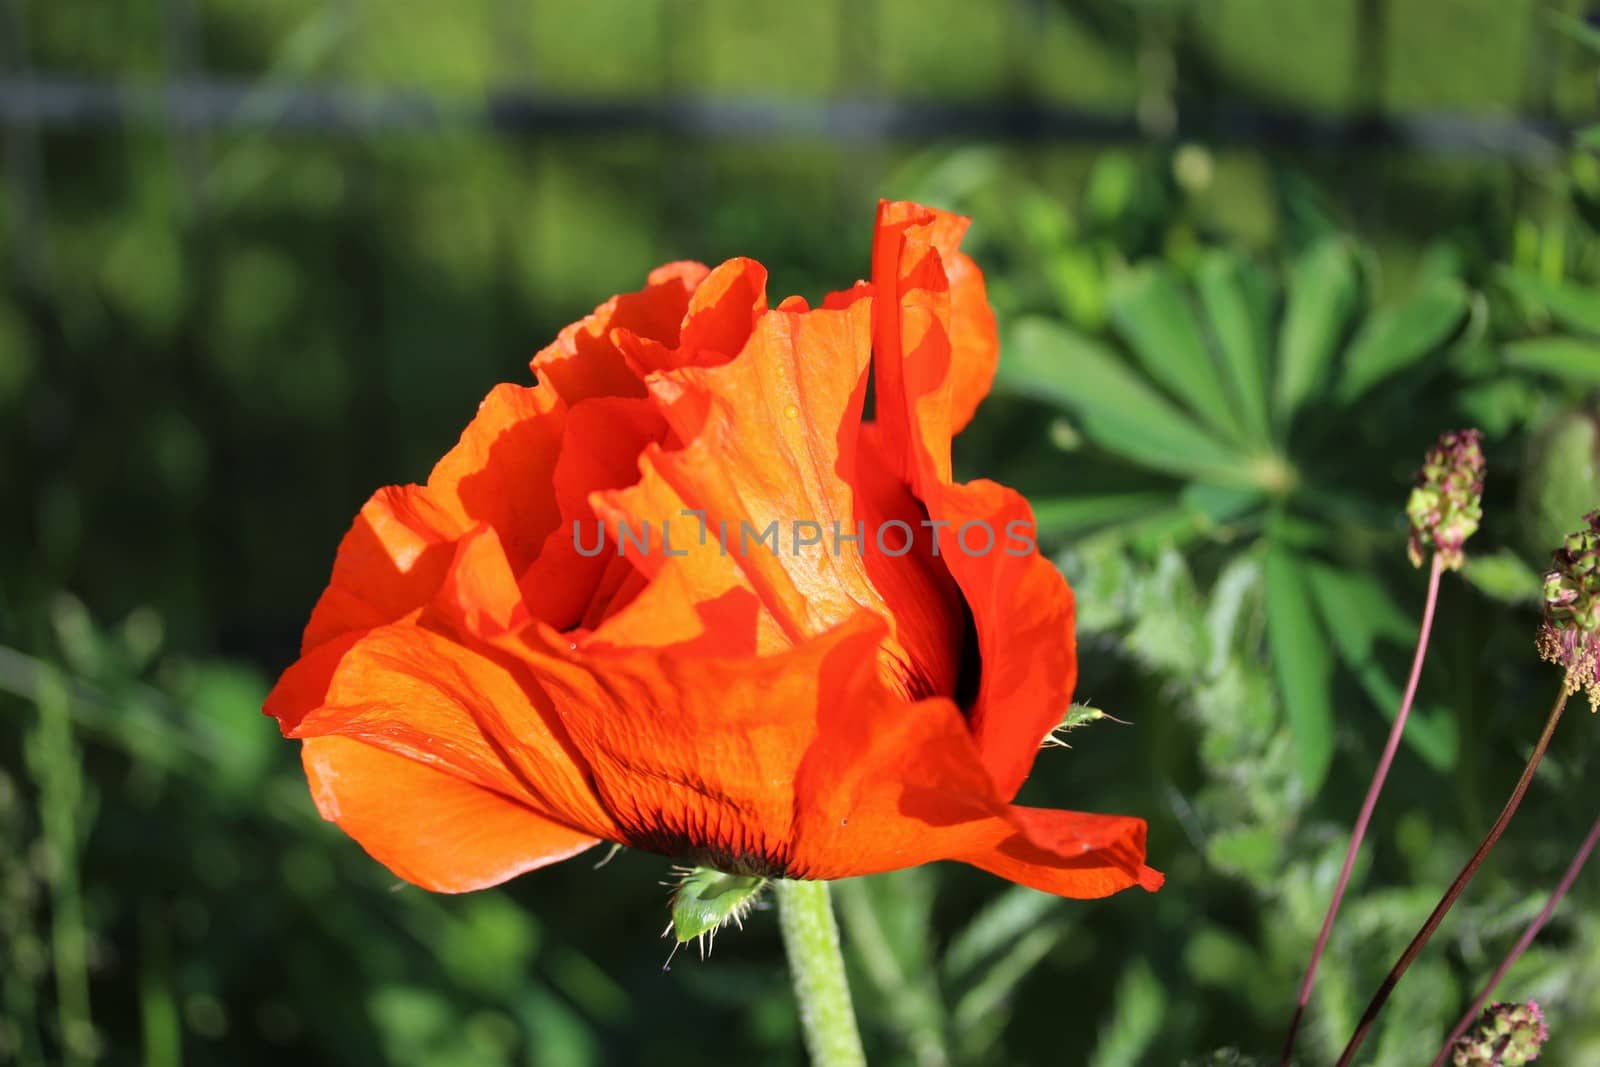 A poppy flower against a green background